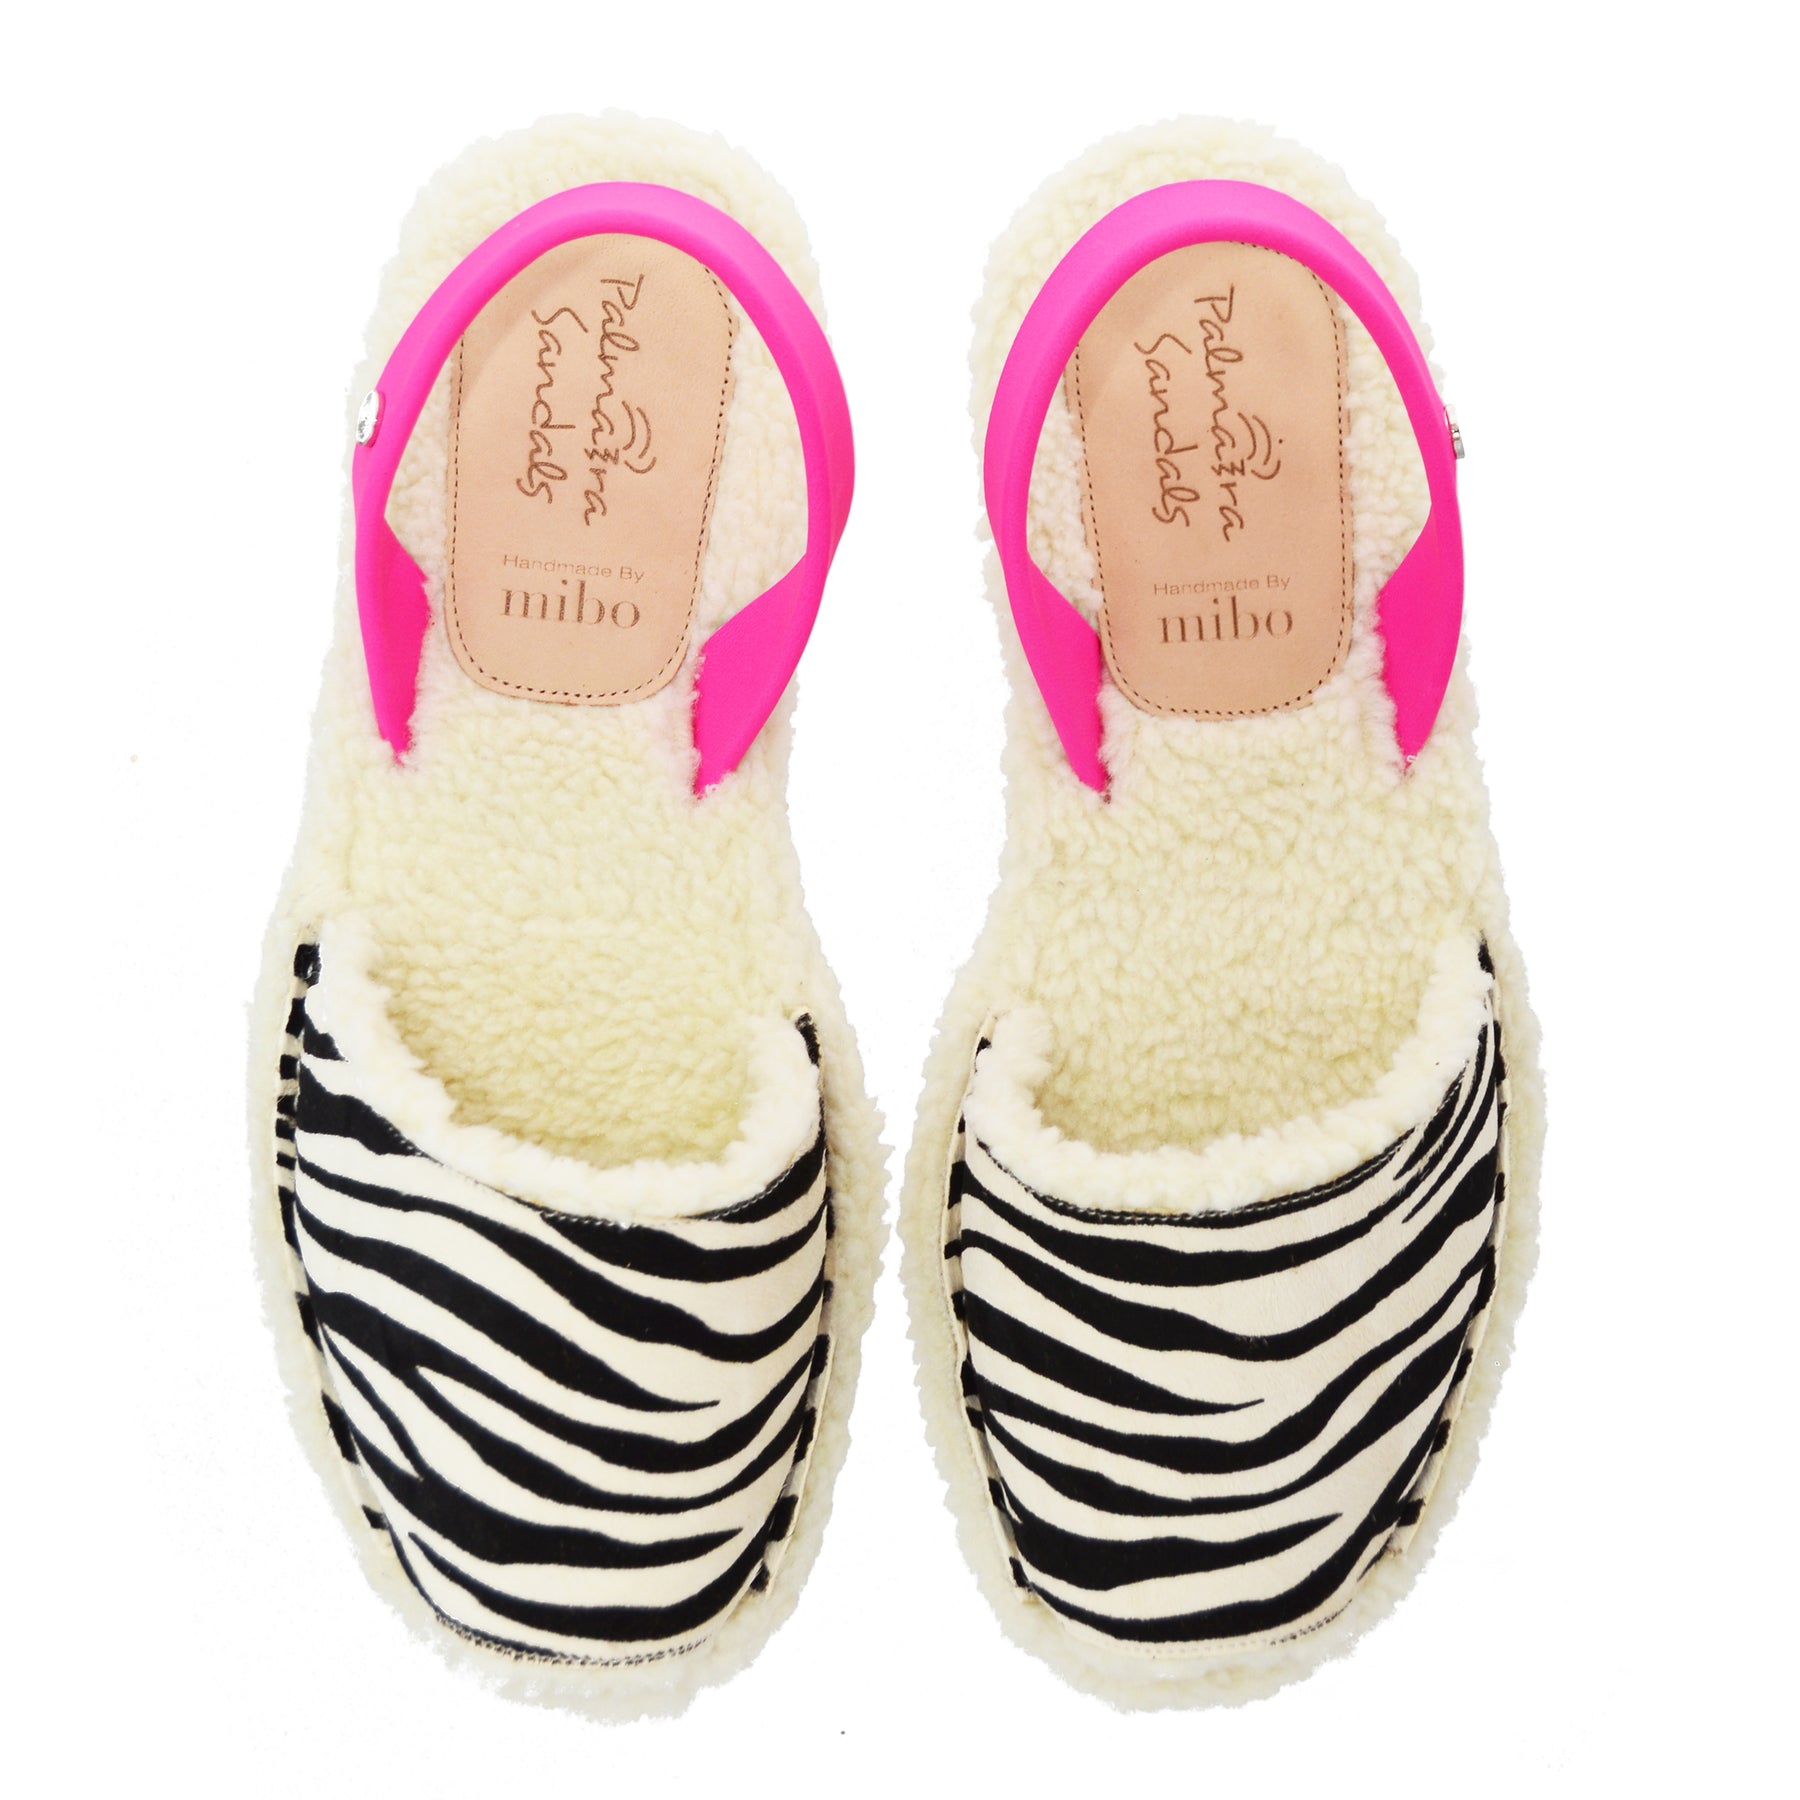 zebra print leather and neon pink heelstrap Menorcan avarca sandal slippers with wool lining